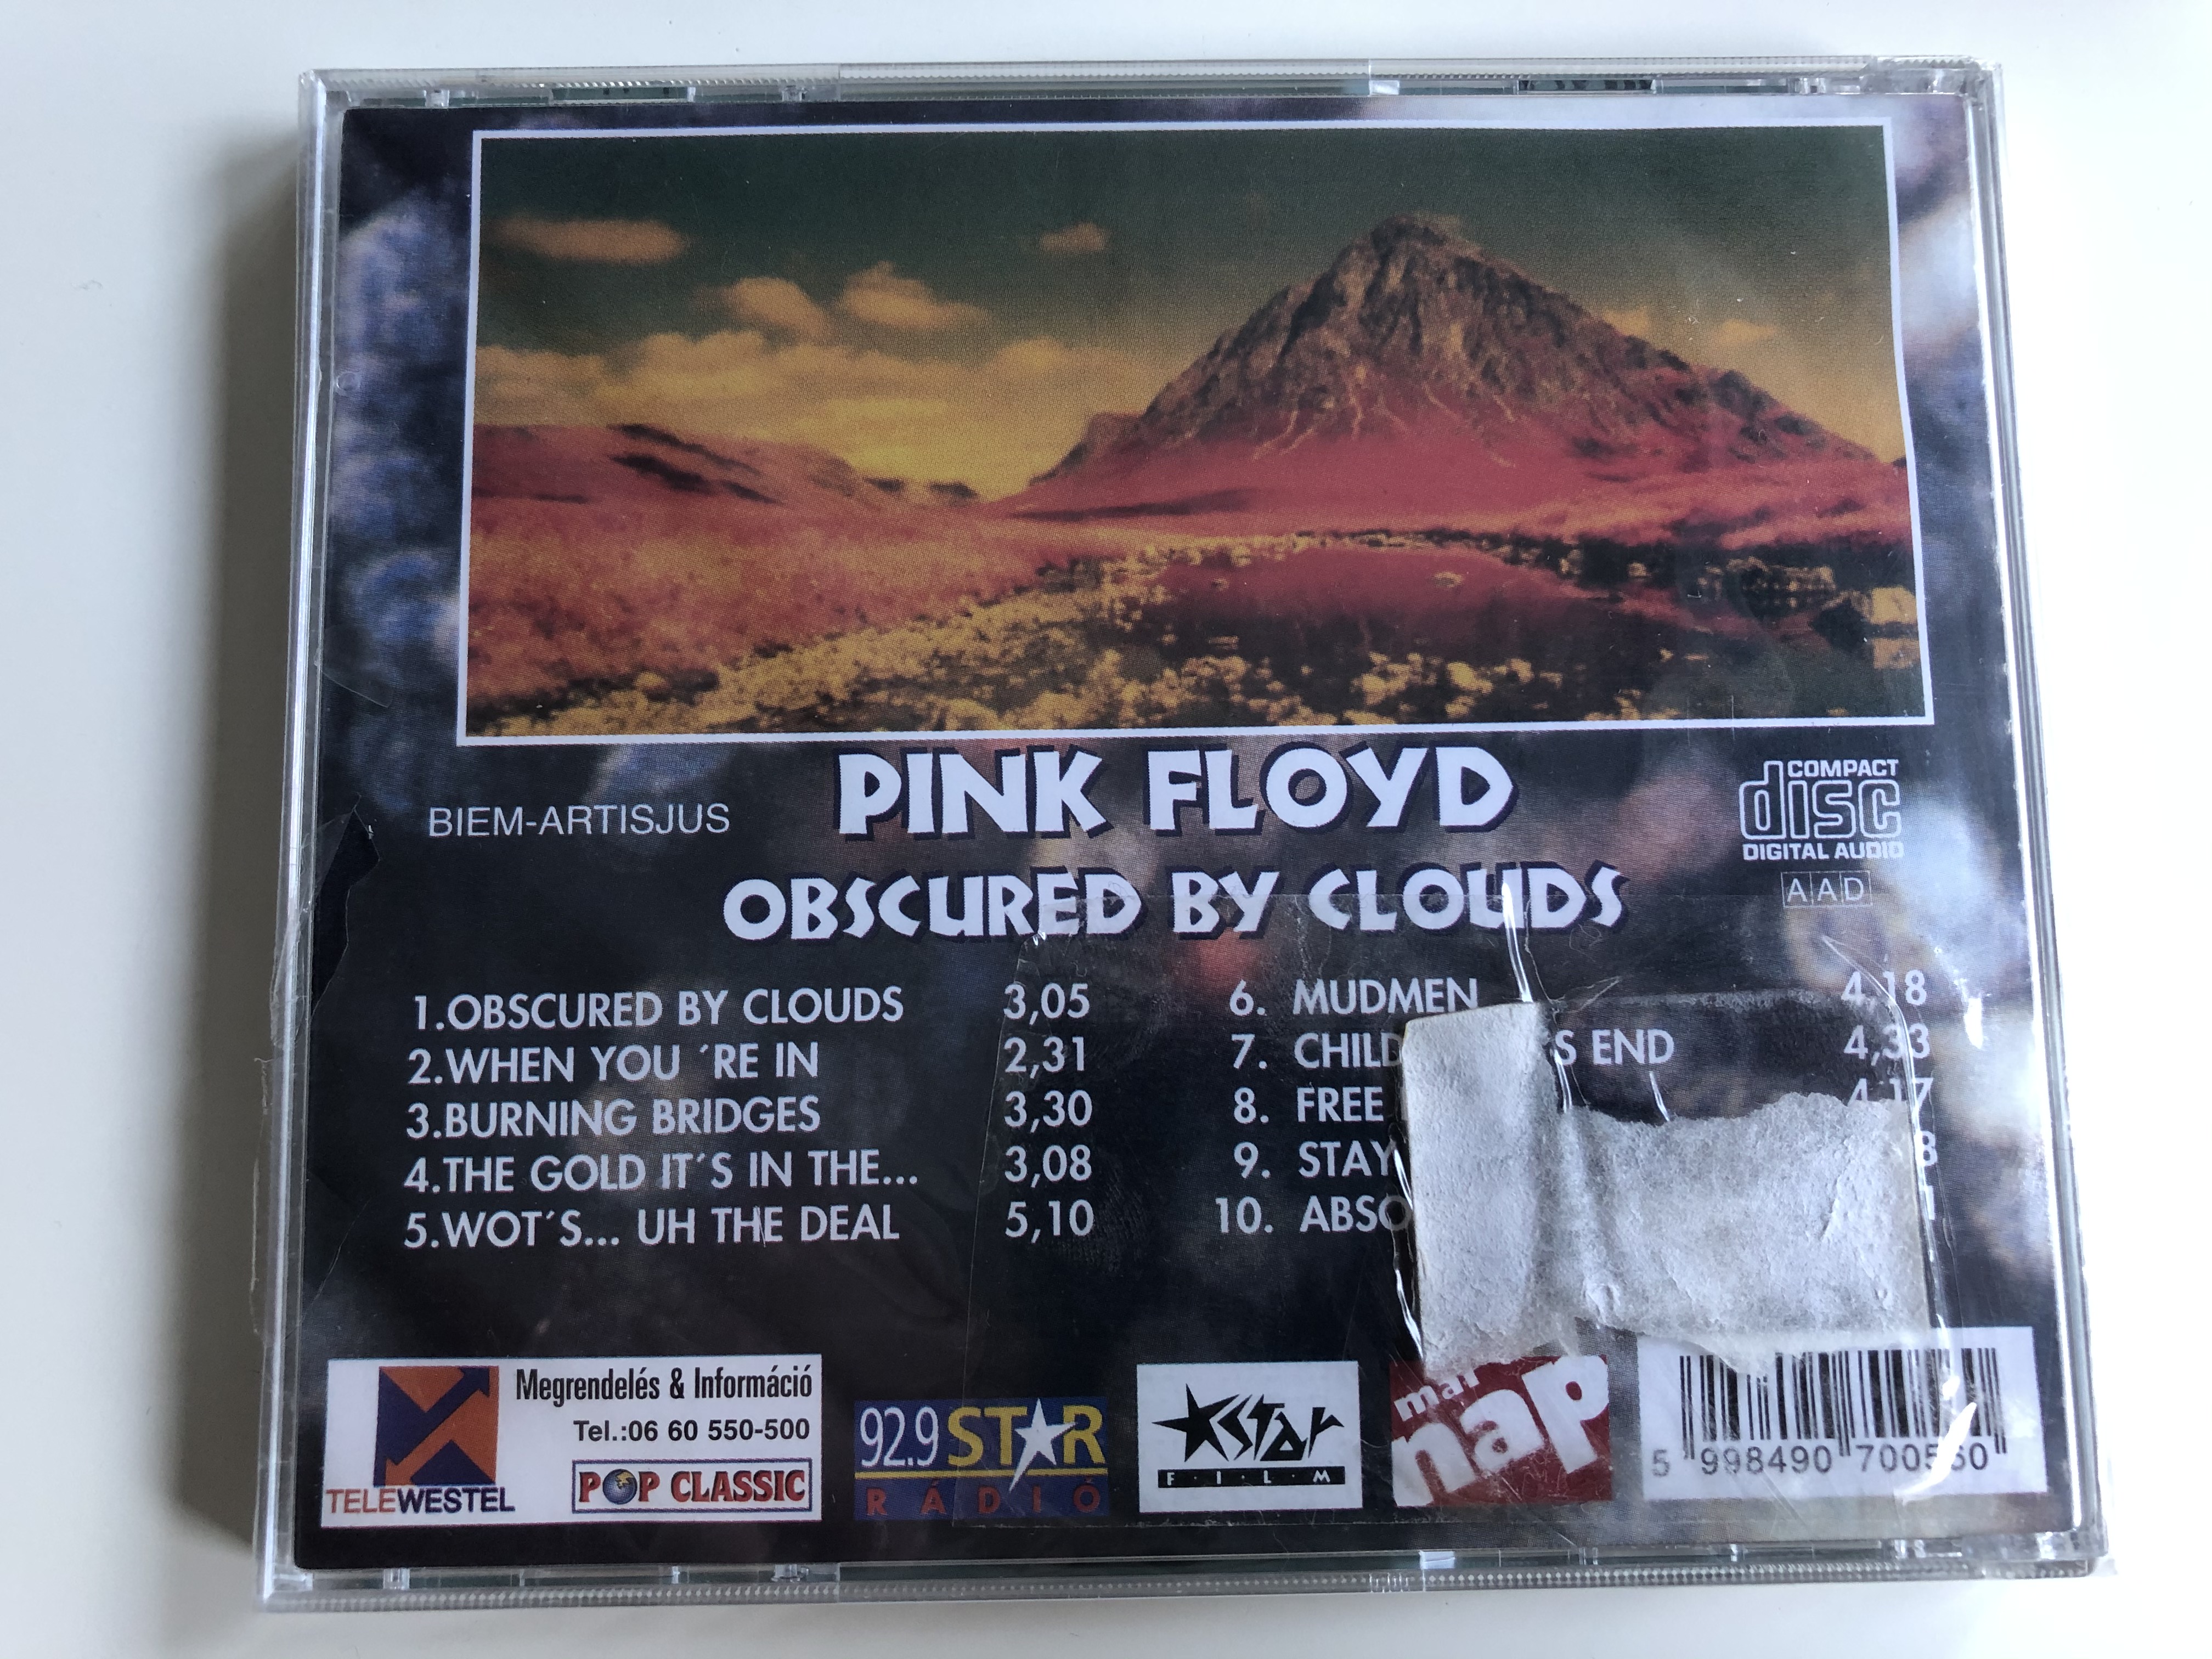 pink-floyd-obscured-by-clouds-pop-classic-euroton-audio-cd-eucd-0056-2-.jpg